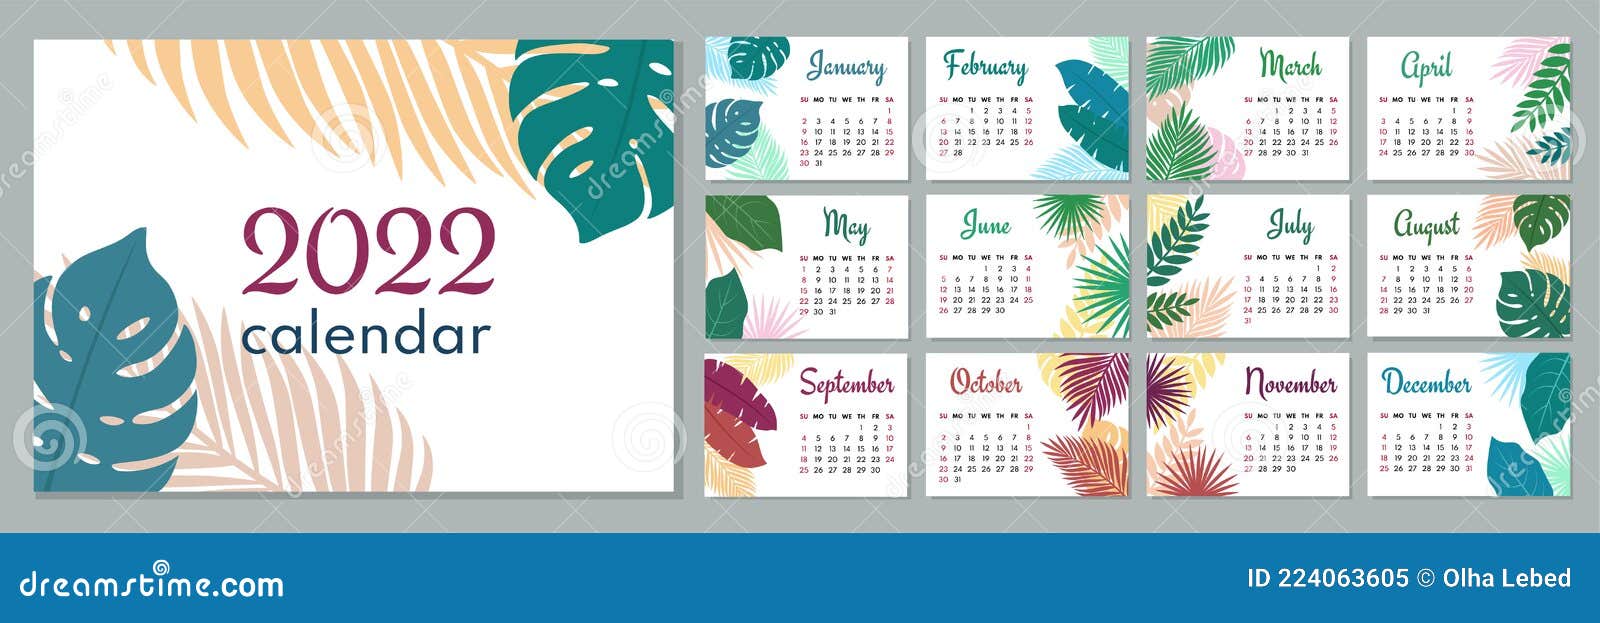 Free Download Calendar 2022 2022 Calendar Template. Calendar Concept Design With Leaves. Week Starts On  Sunday. Set Of 12 Months 2022 Pages. Stock Vector - Illustration Of Annual,  Colorful: 224063605